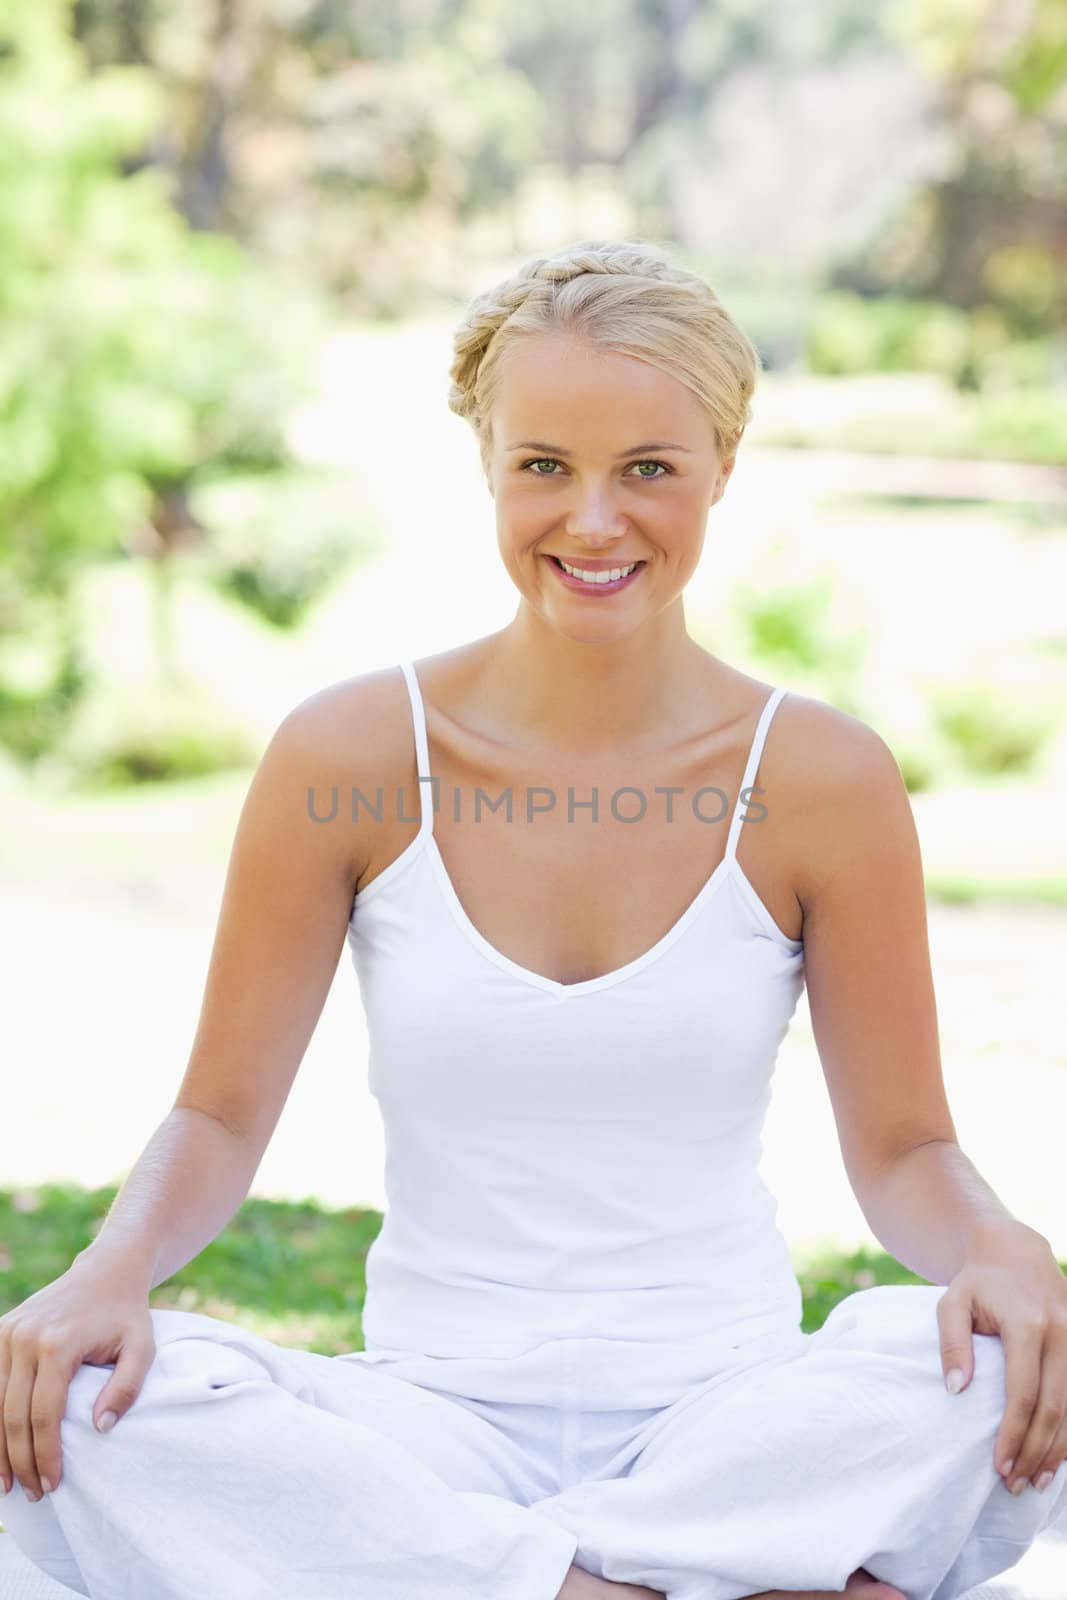 Smiling young woman in a yoga position on the lawn